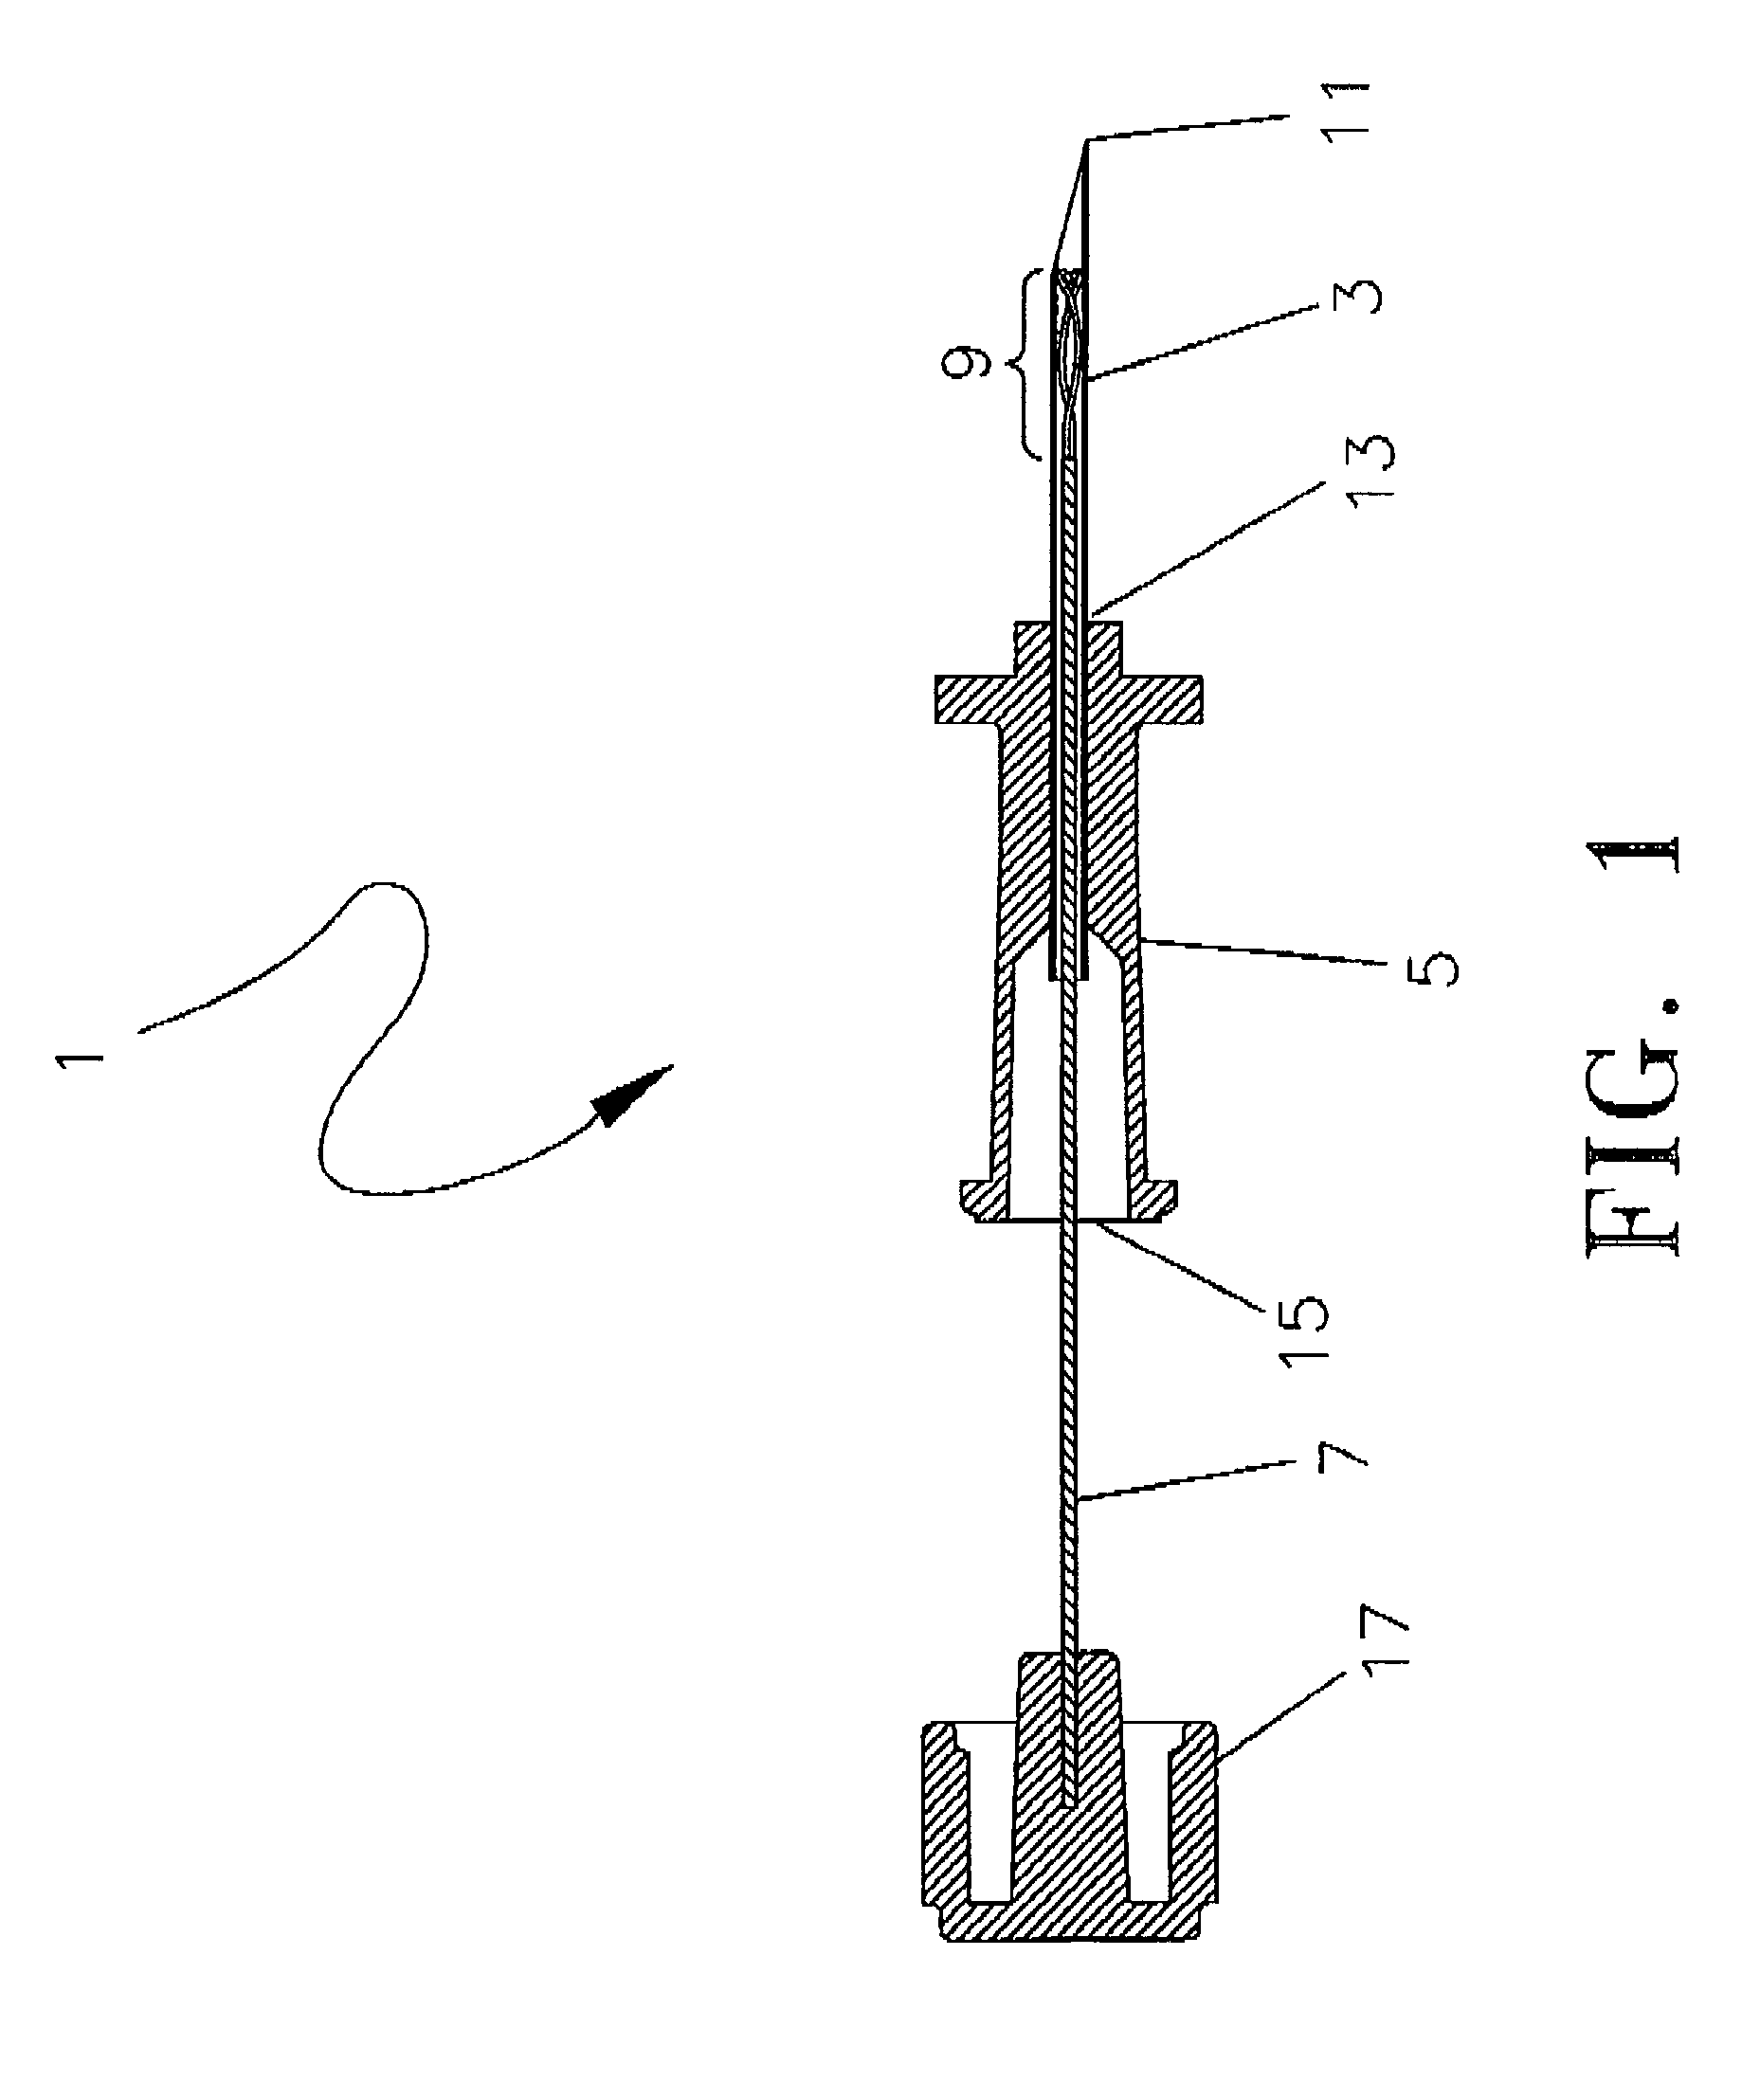 Device and method for withdrawing a tubular body part